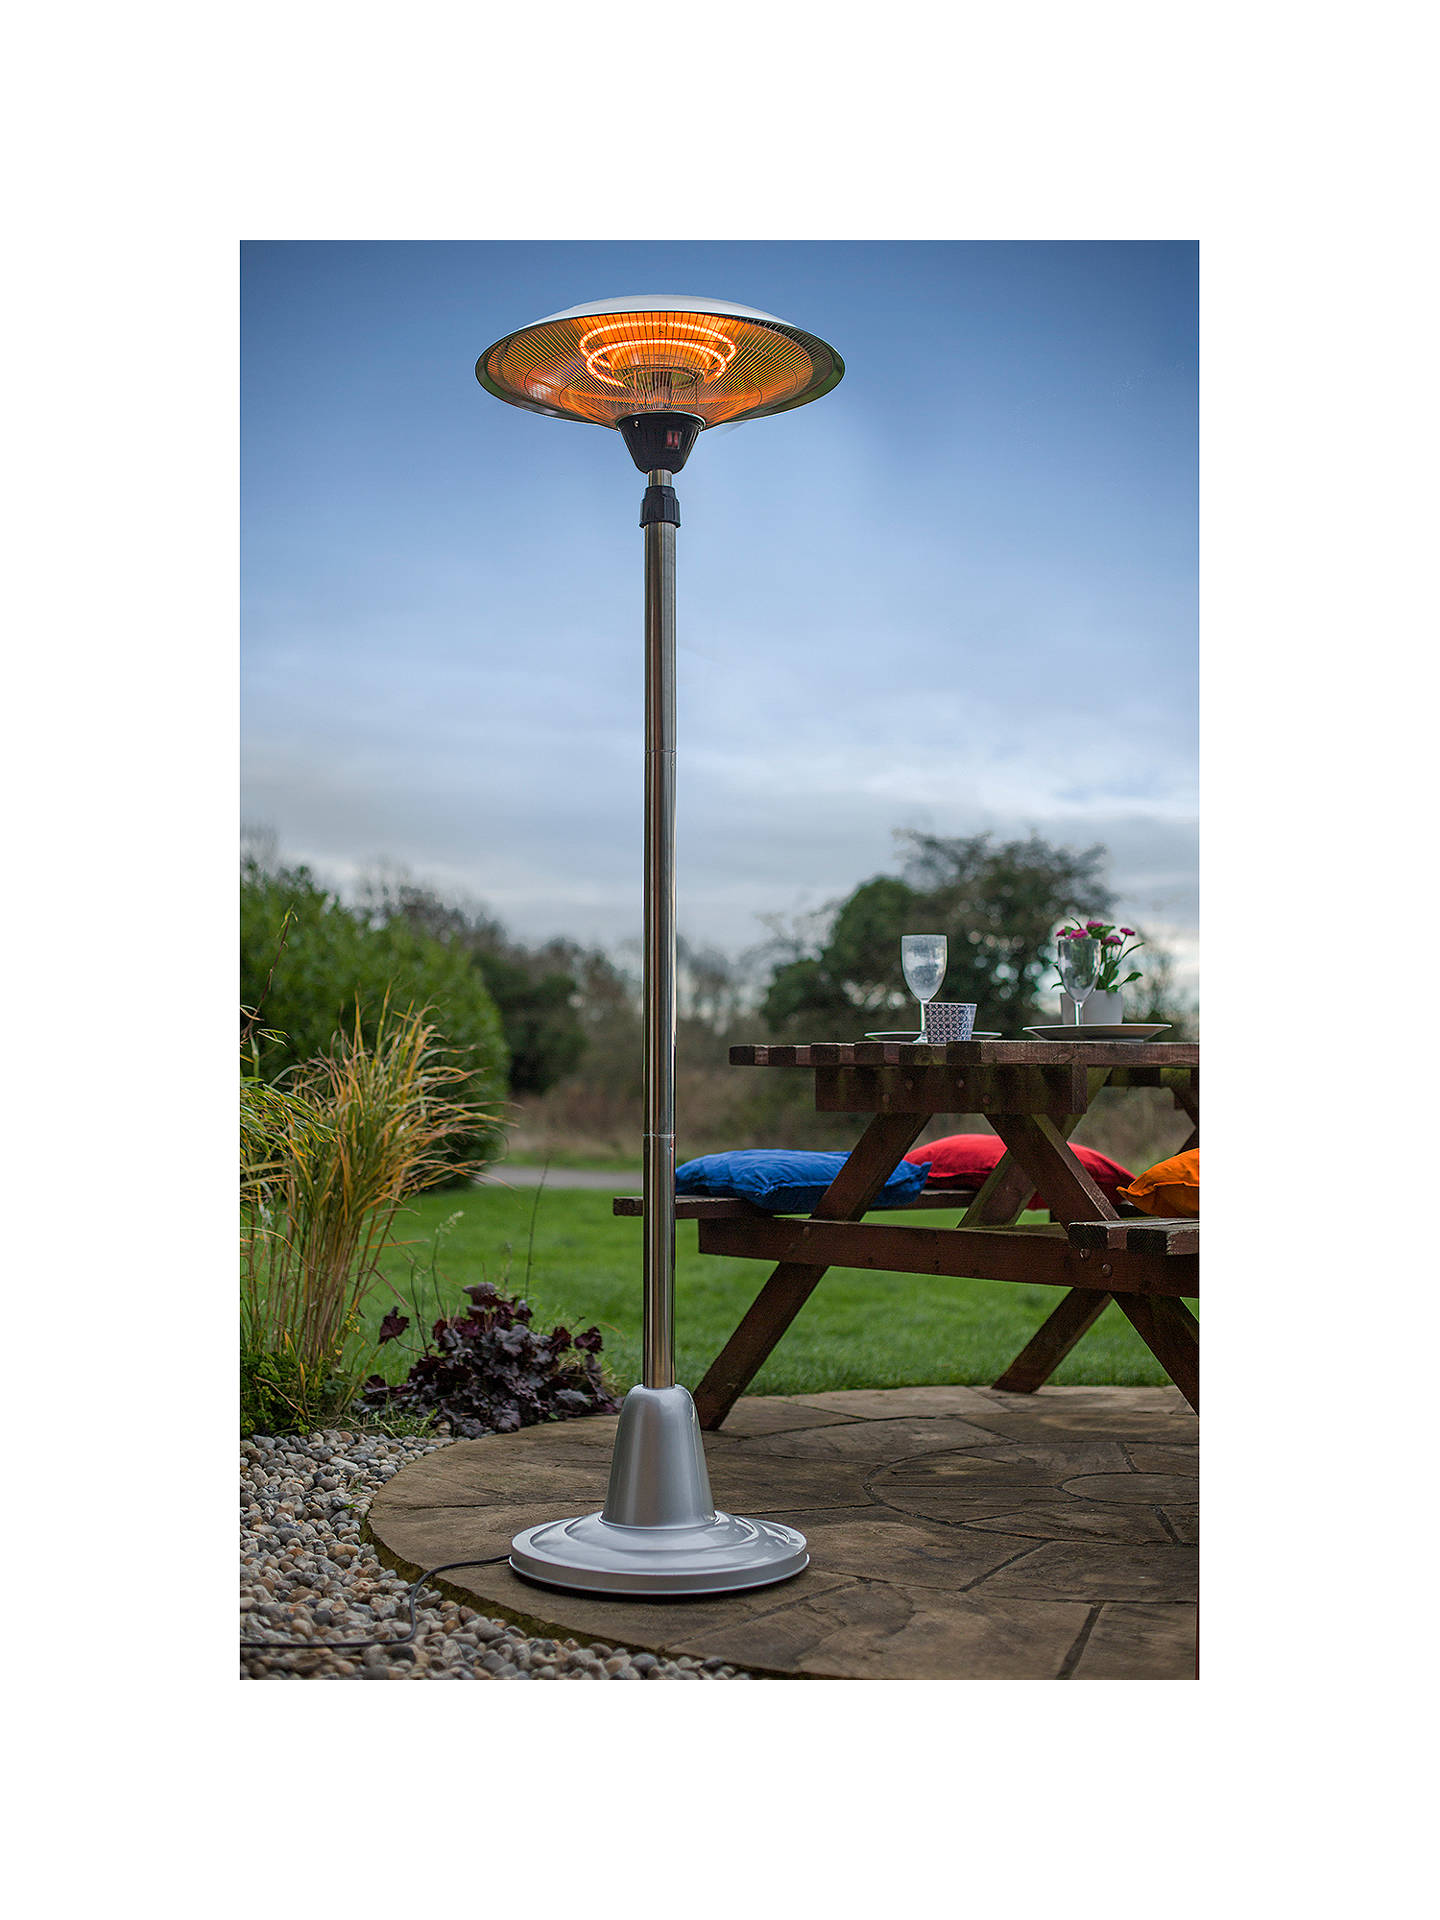 Why it’s important to have patio heater in winters?